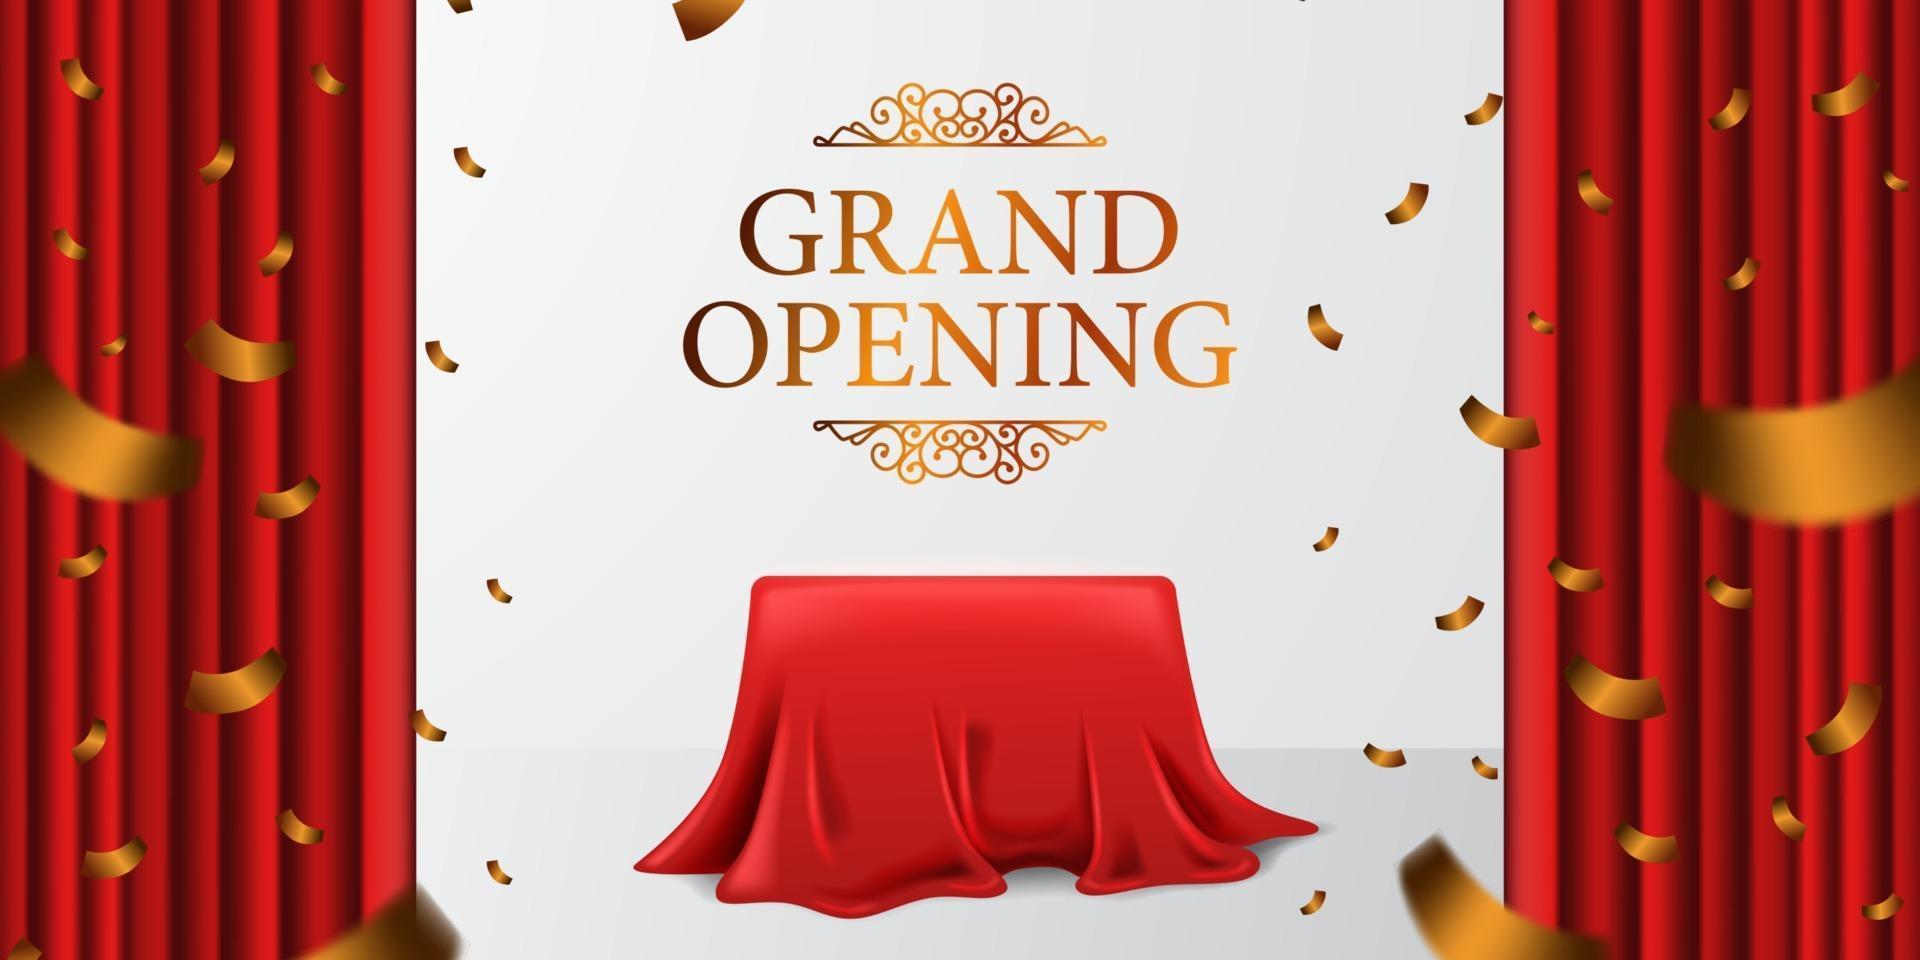 Grand Opening royal elegant surprise with satin fabric cloth curtain and cover box and golden confetti with white background vector